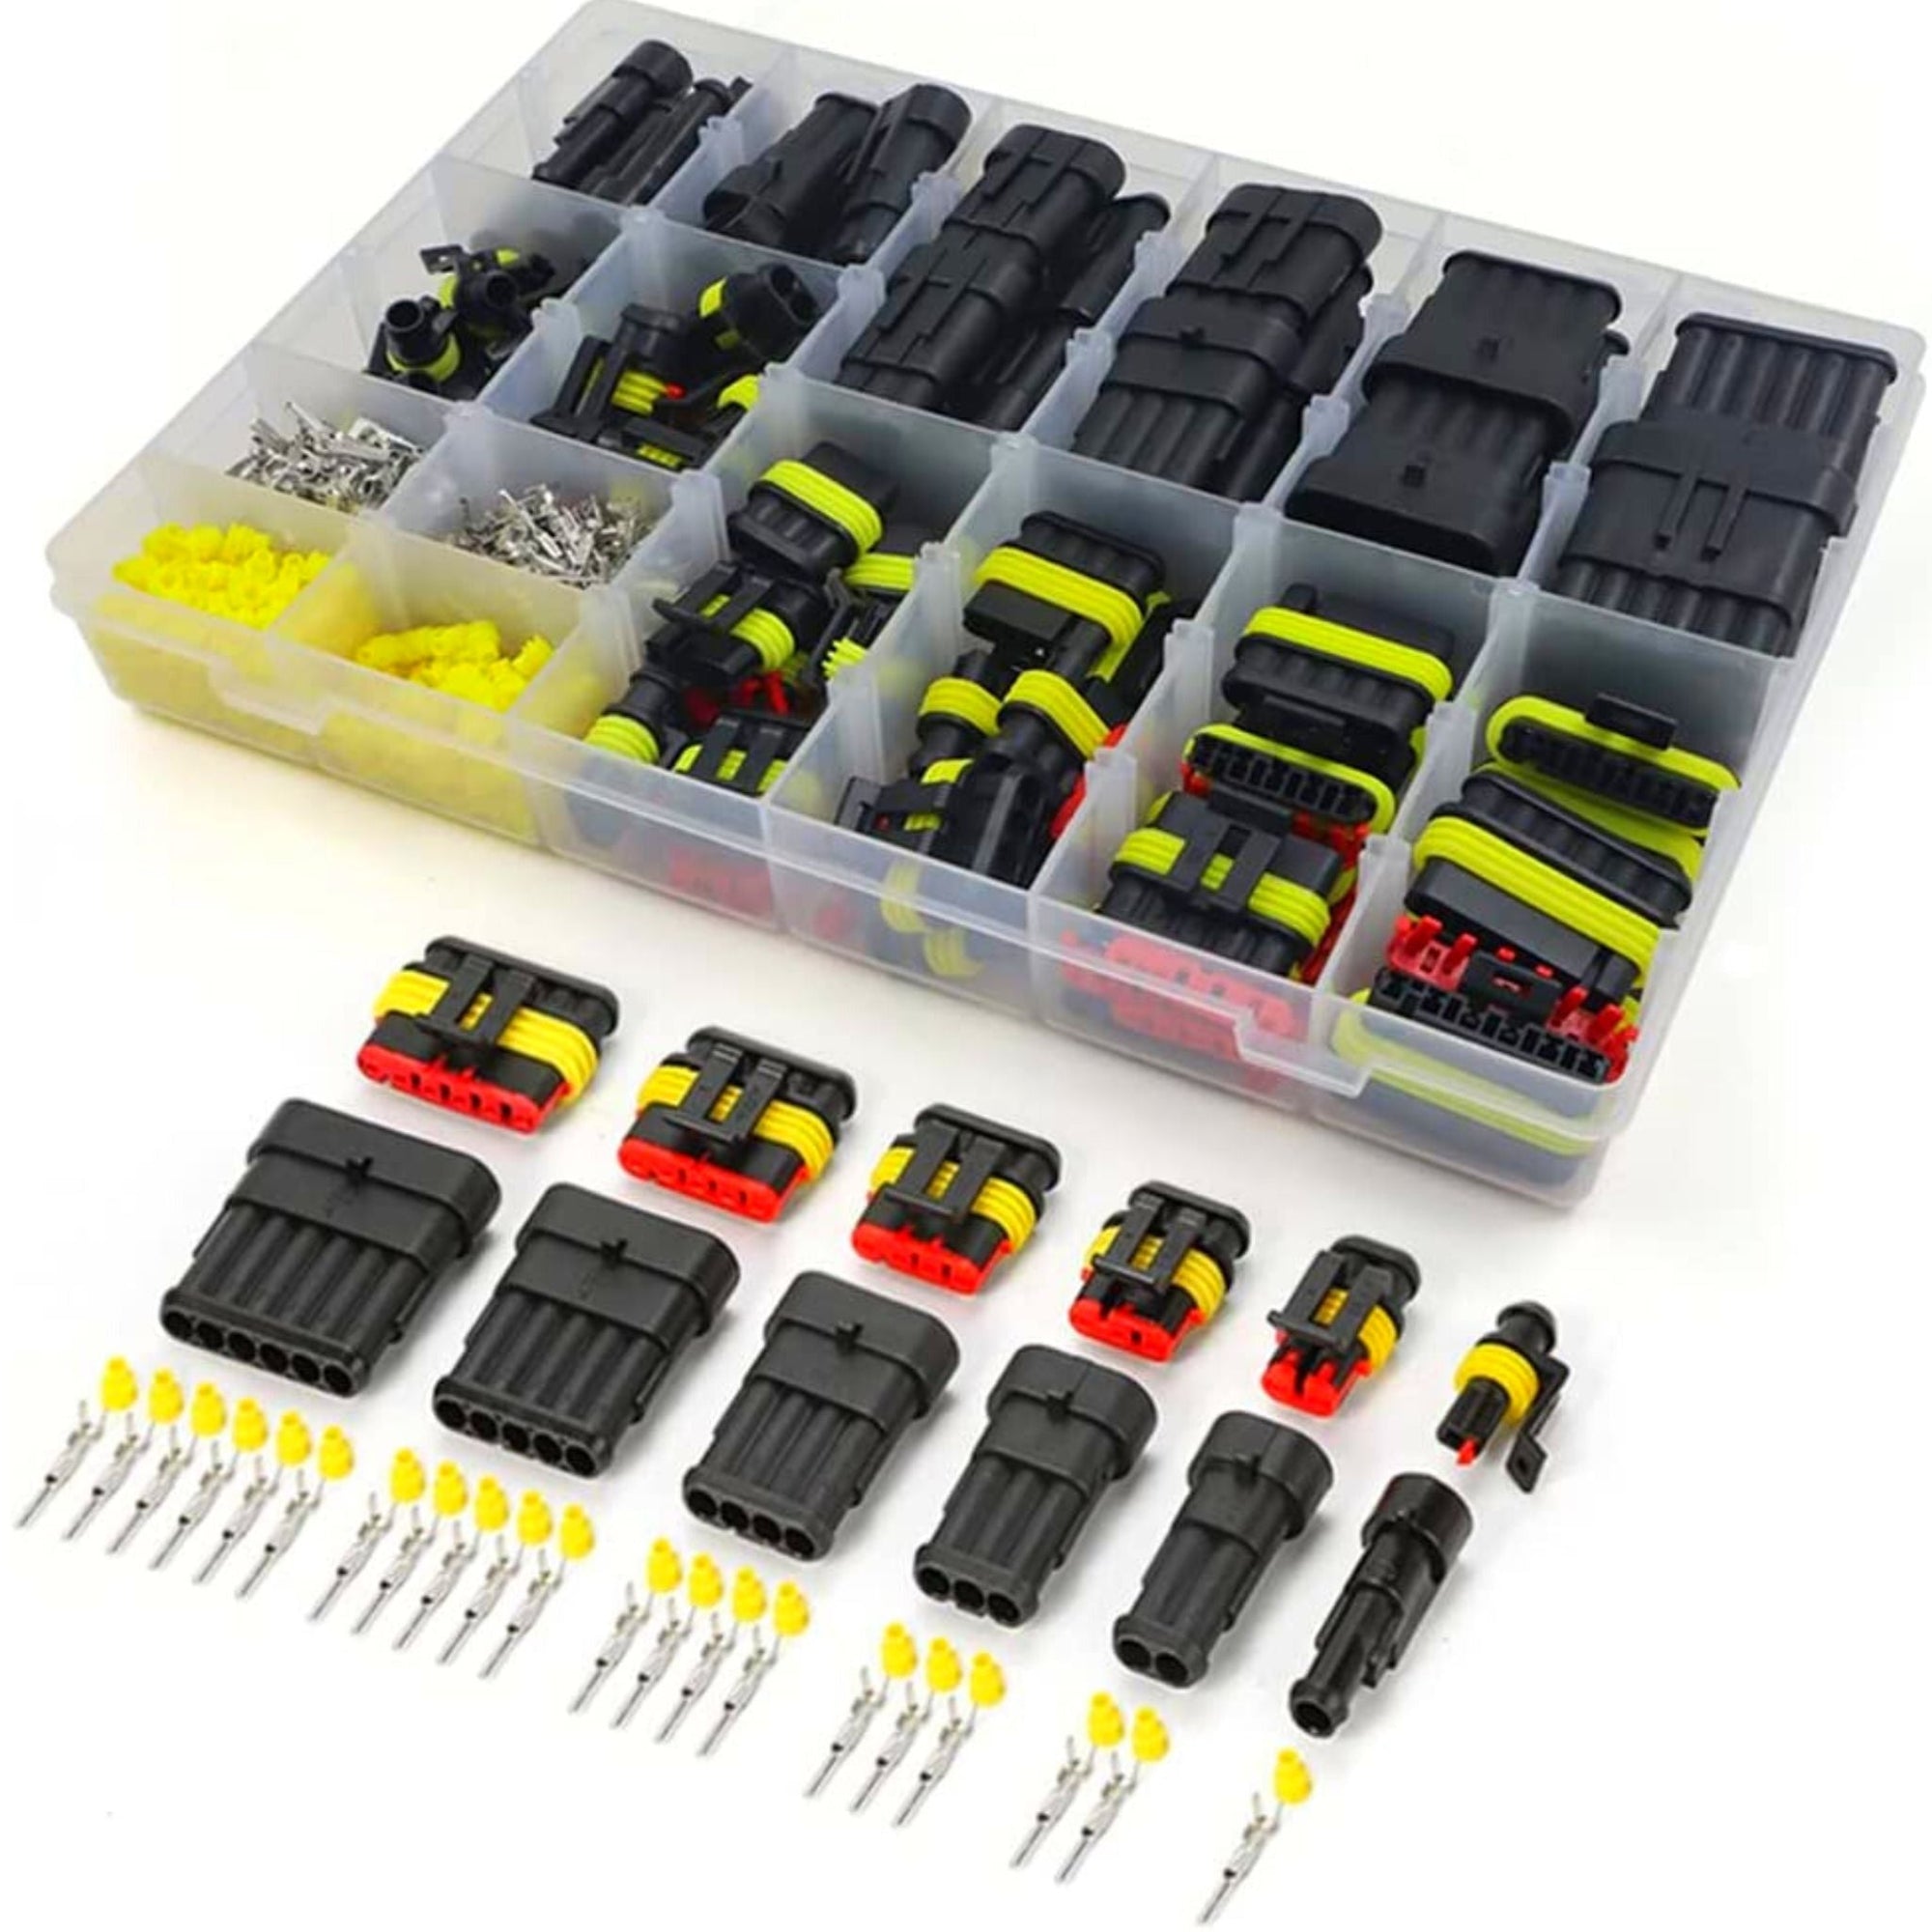 708 Piece Waterproof Electrical Wire Automotive Plug Connector Kit - South East Clearance Centre